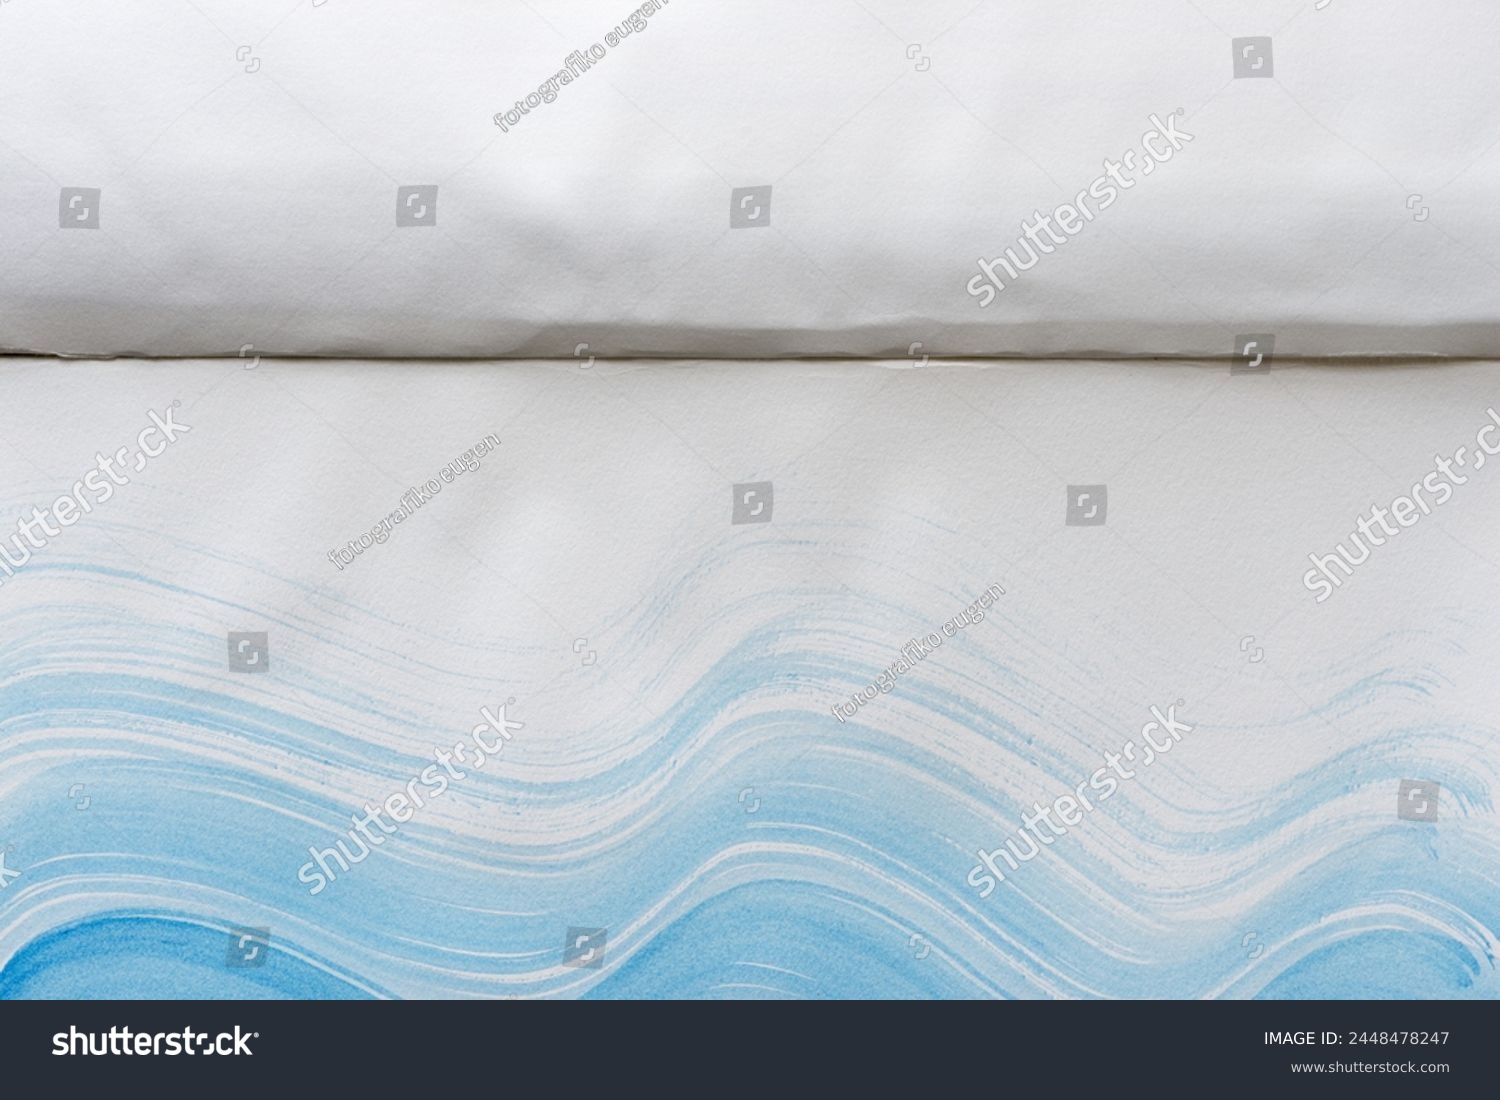 patterned blue gradient fluid lines on paper with texture  #2448478247